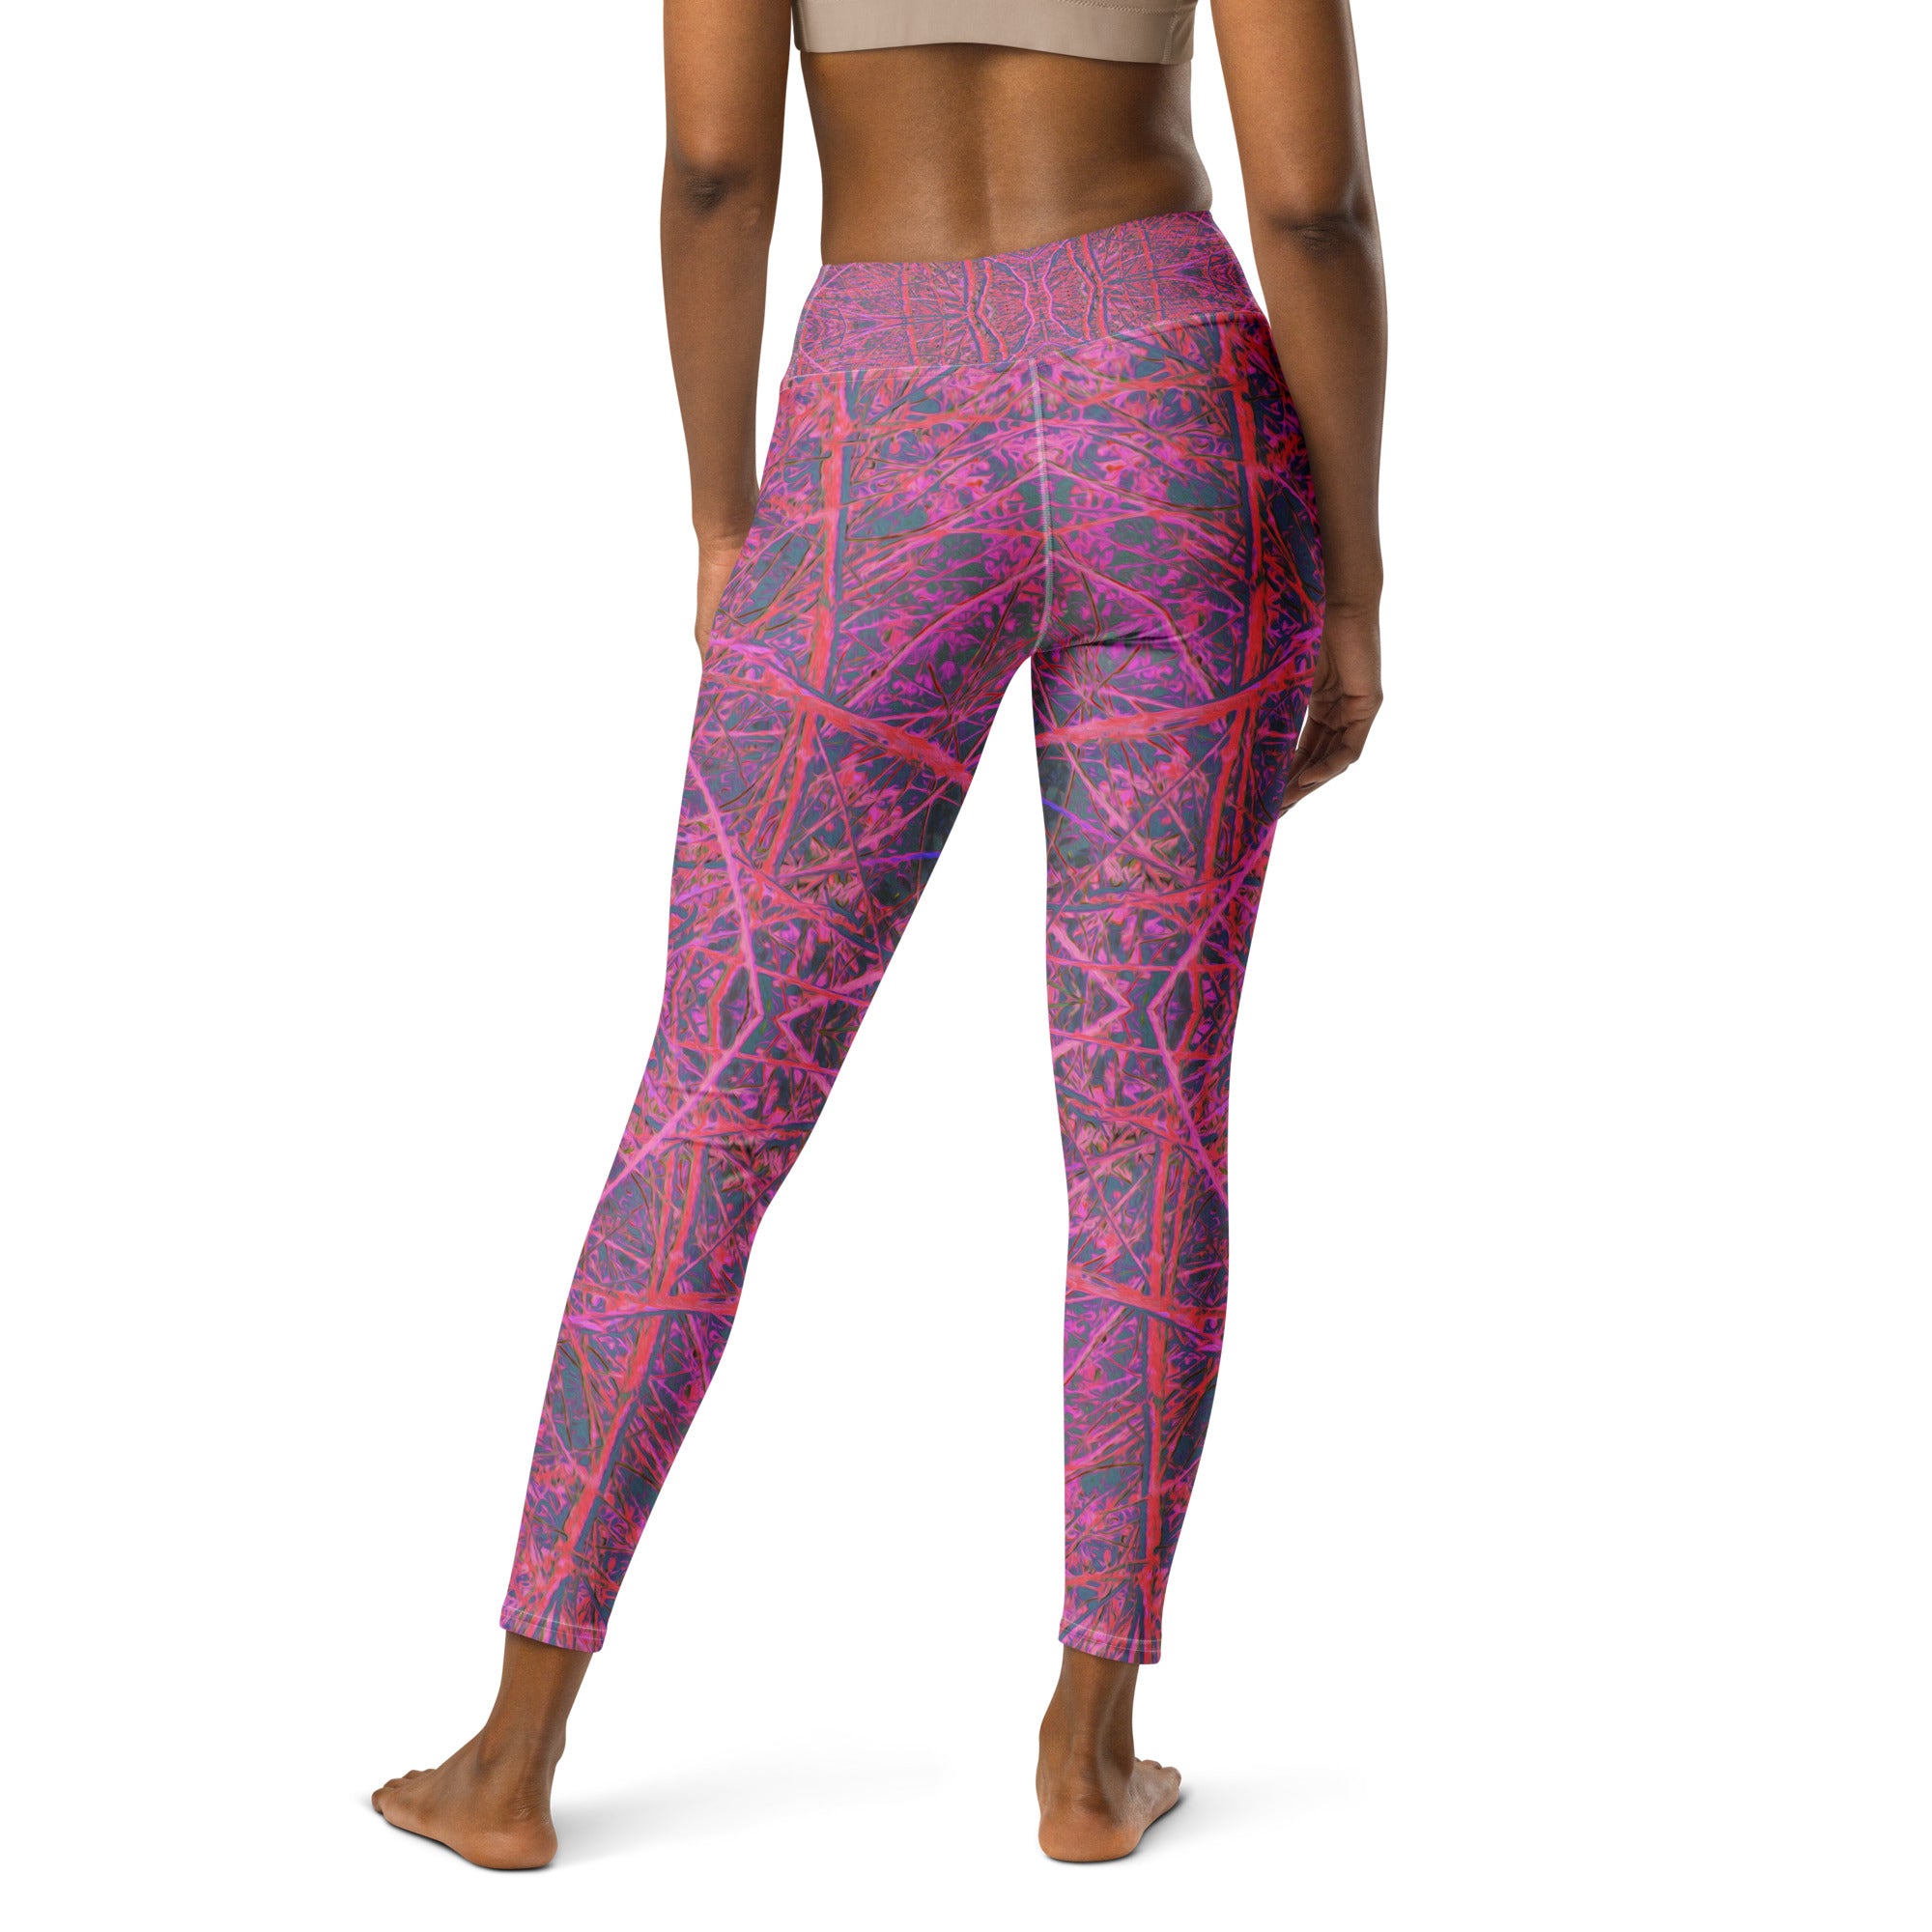 Yoga Leggings for Women - Cool Pink and Green Abstract Branch Pattern